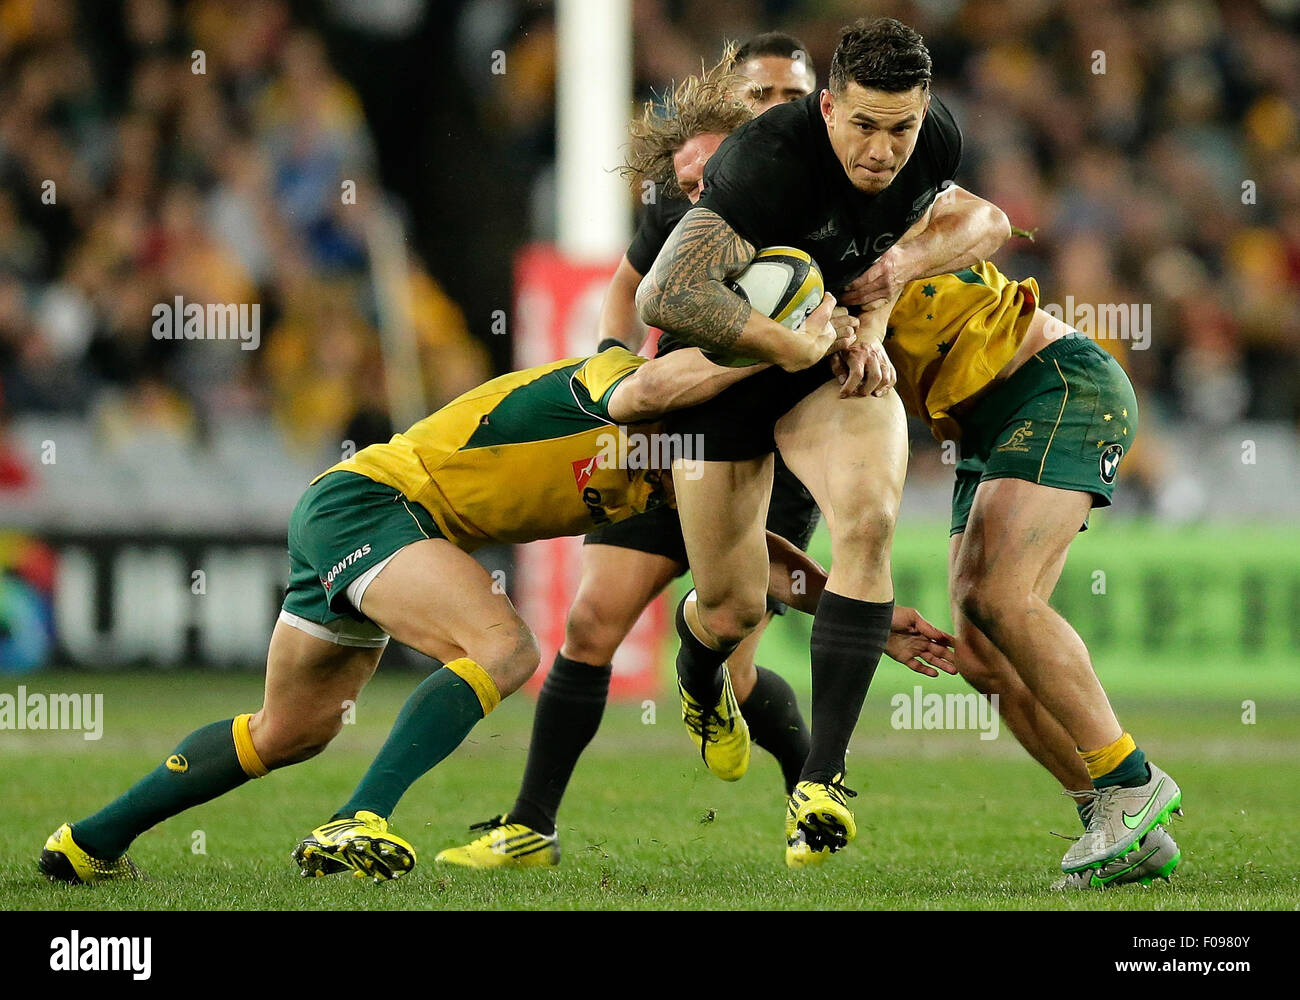 Sydney, Australia. 08th Aug, 2015. Sonny Bill Williams of the All Blacks is tackled by Michael Hooper of the Wallabies during the Bledisloe Cup match between the Wallabies and the All Blacks at ANZ Stadium, Sydney, Australia. © Action Plus Sports/Alamy Live News Stock Photo